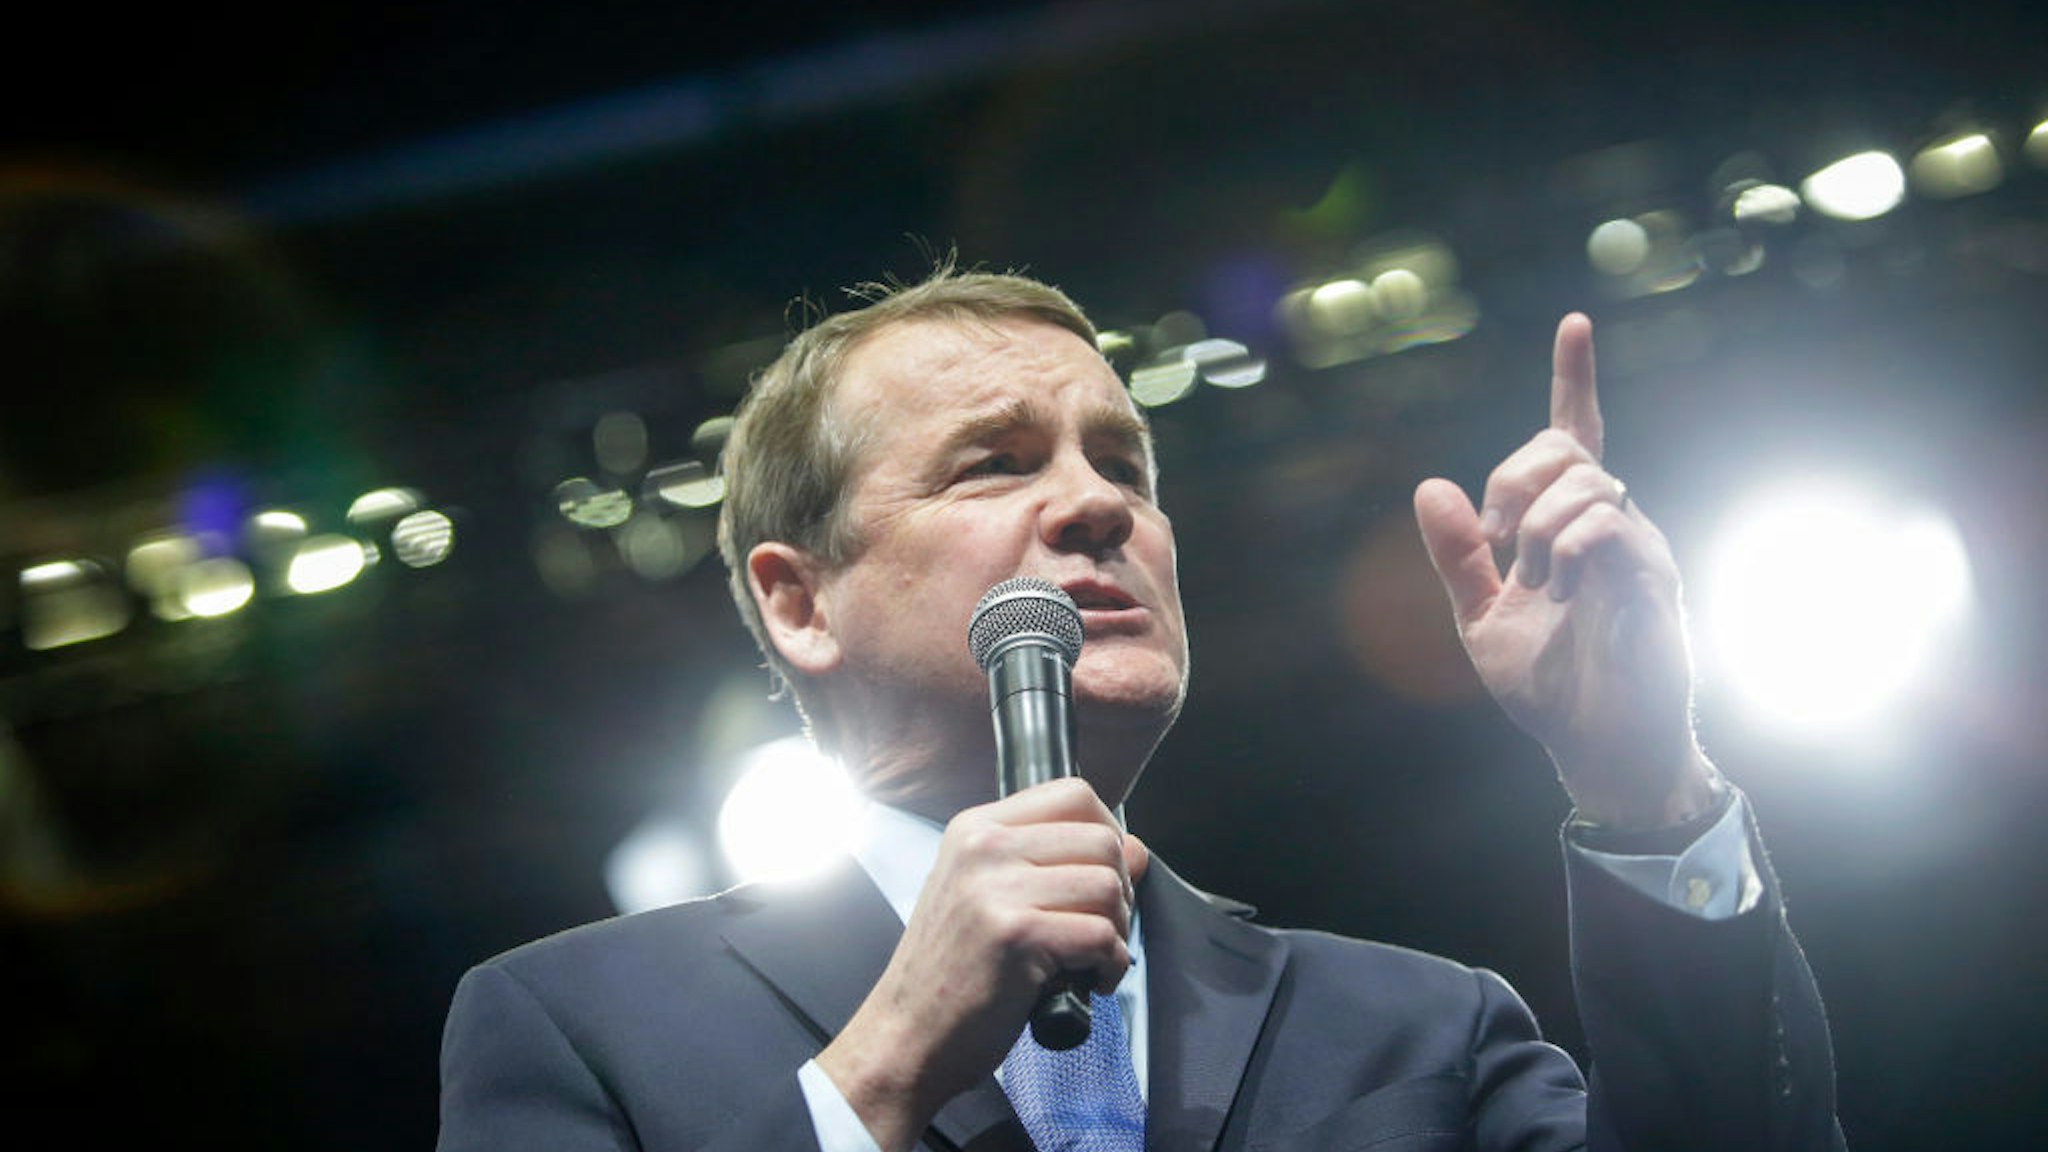 Michael Bennet speaks during The Iowa Democratic Party Liberty & Justice Celebration